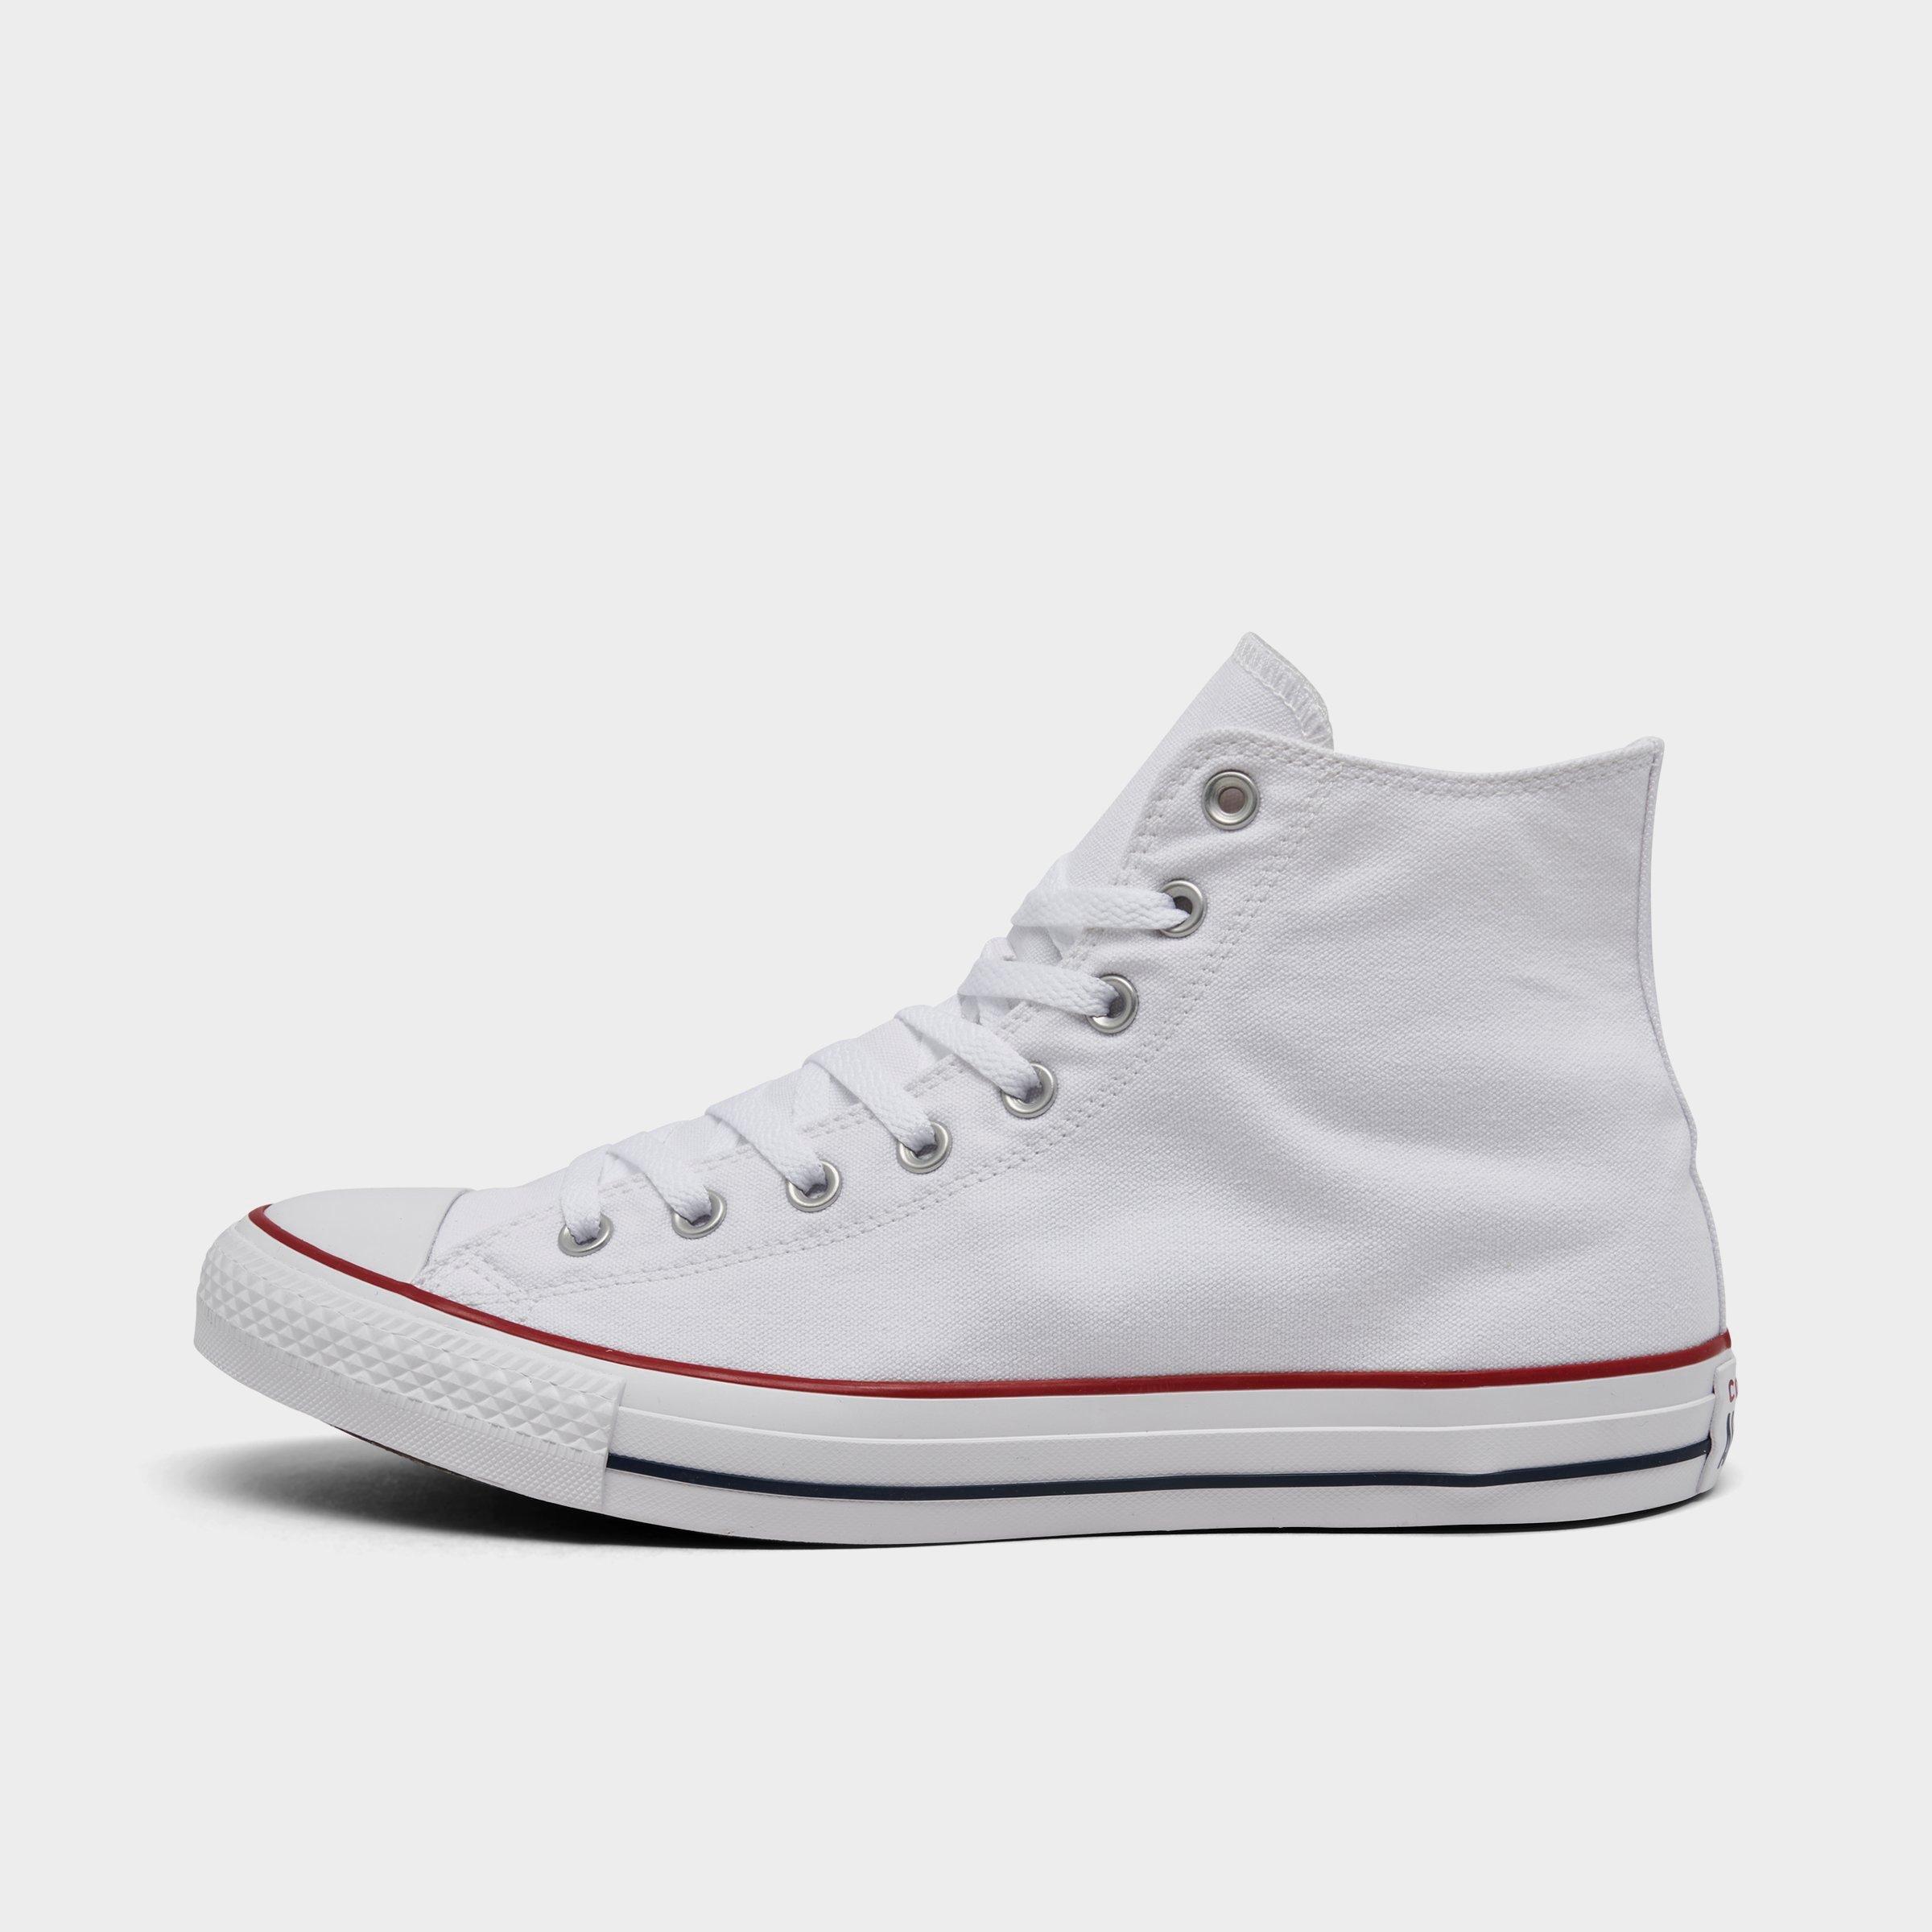 converse shoes white high tops